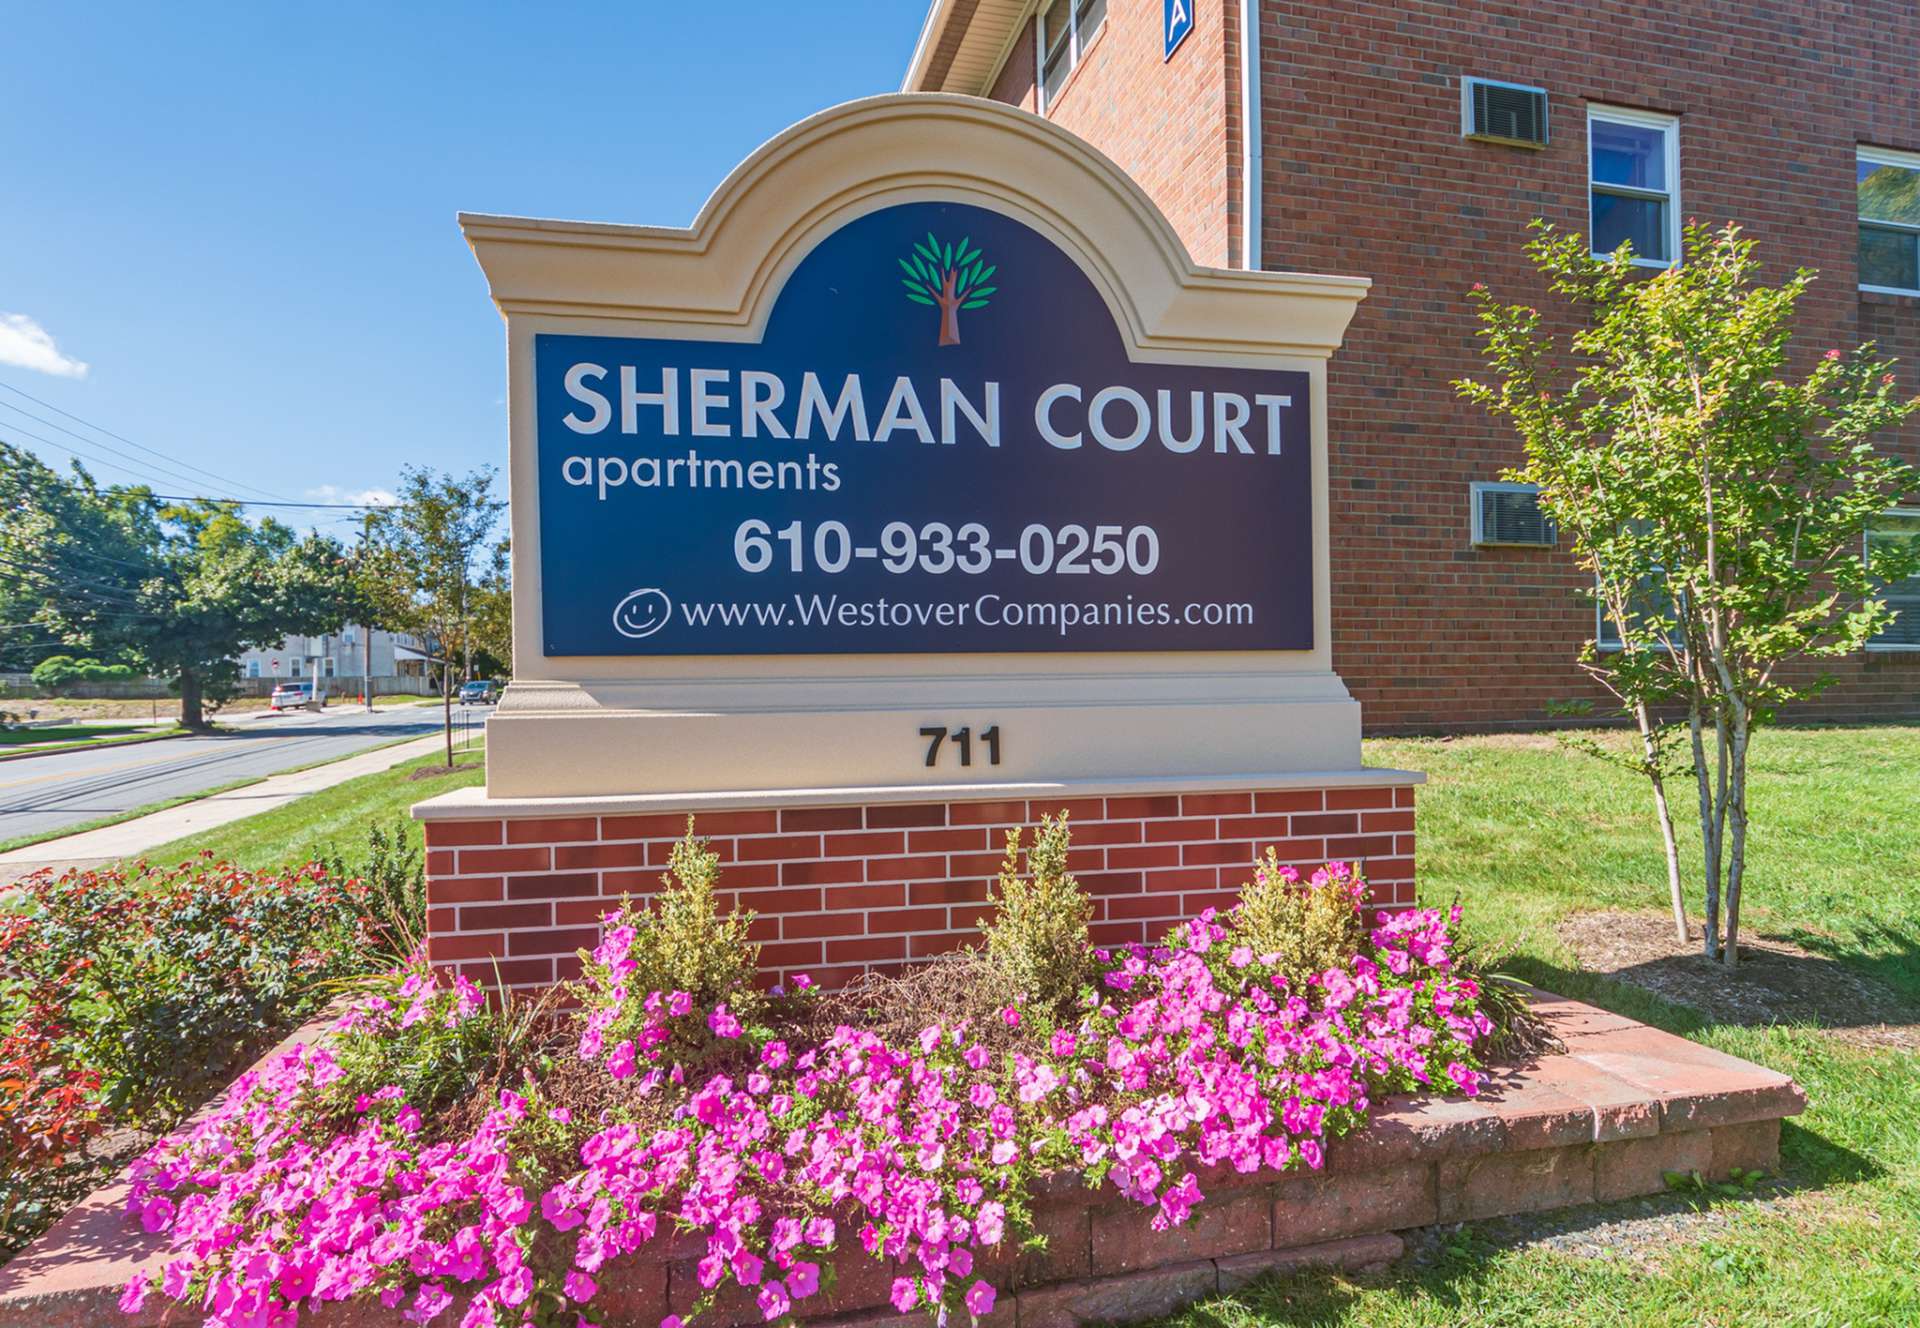 Sherman Court Apartments sign with various flowers around the sign.